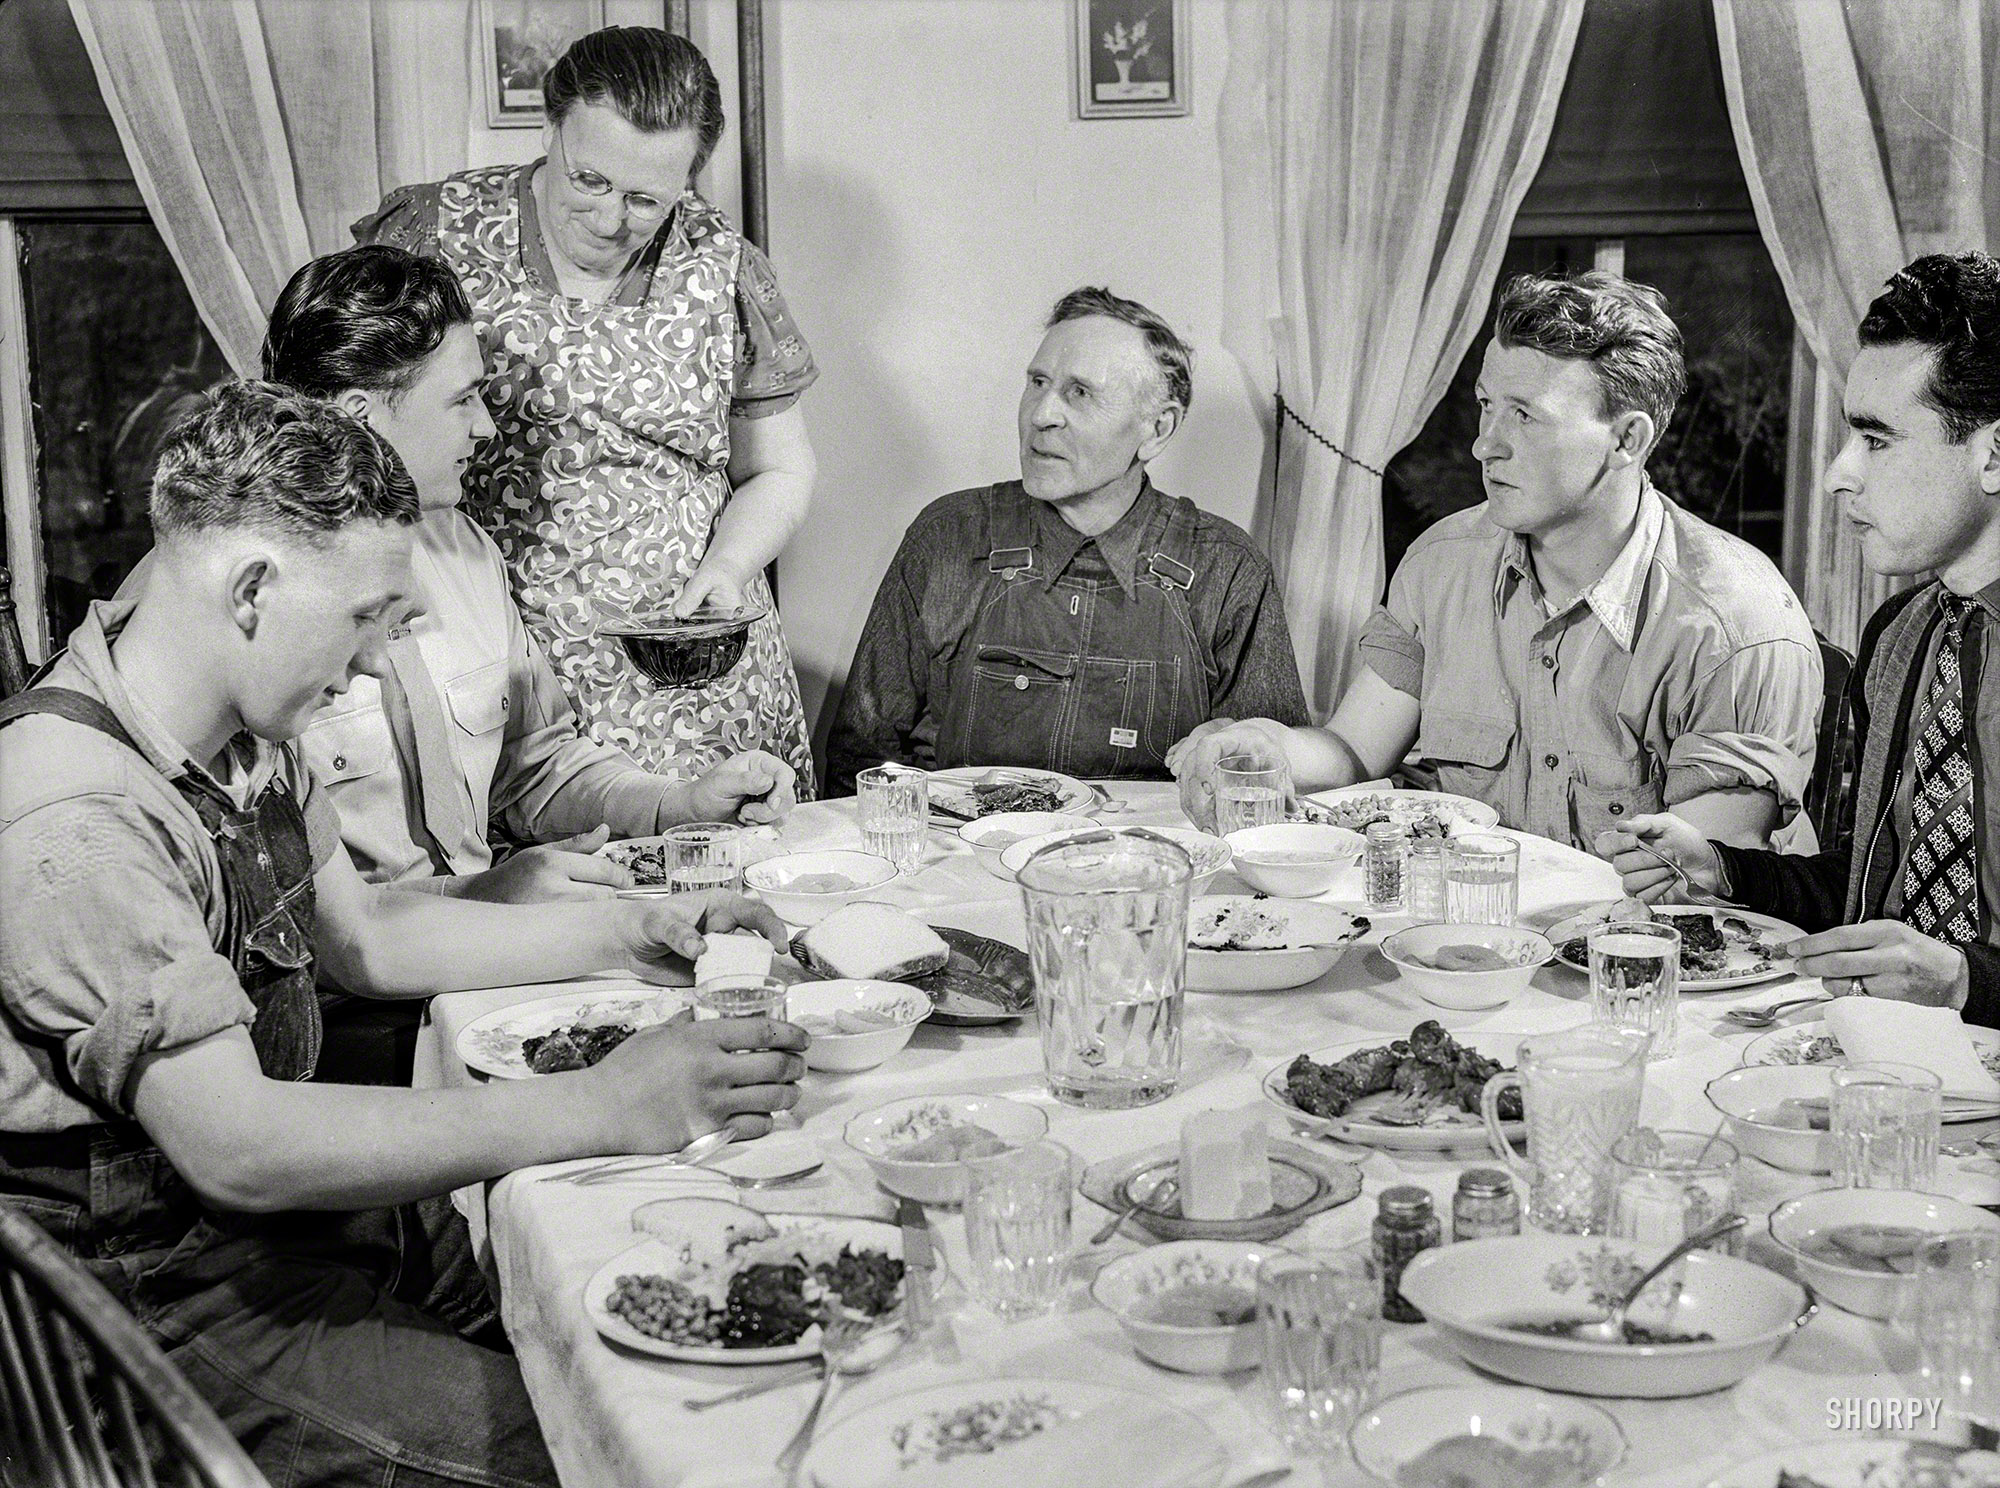 July 1943. "Rockville, Maryland (vicinity). Private Harvey Horton, visiting the N.C. Stiles dairy farm while on furlough from Fort Belvoir, Virginia, at dinner with the family." Including, at left, 16-year-old Charles Stiles. Photo by Ann Rosener for the Office of War Information. View full size.